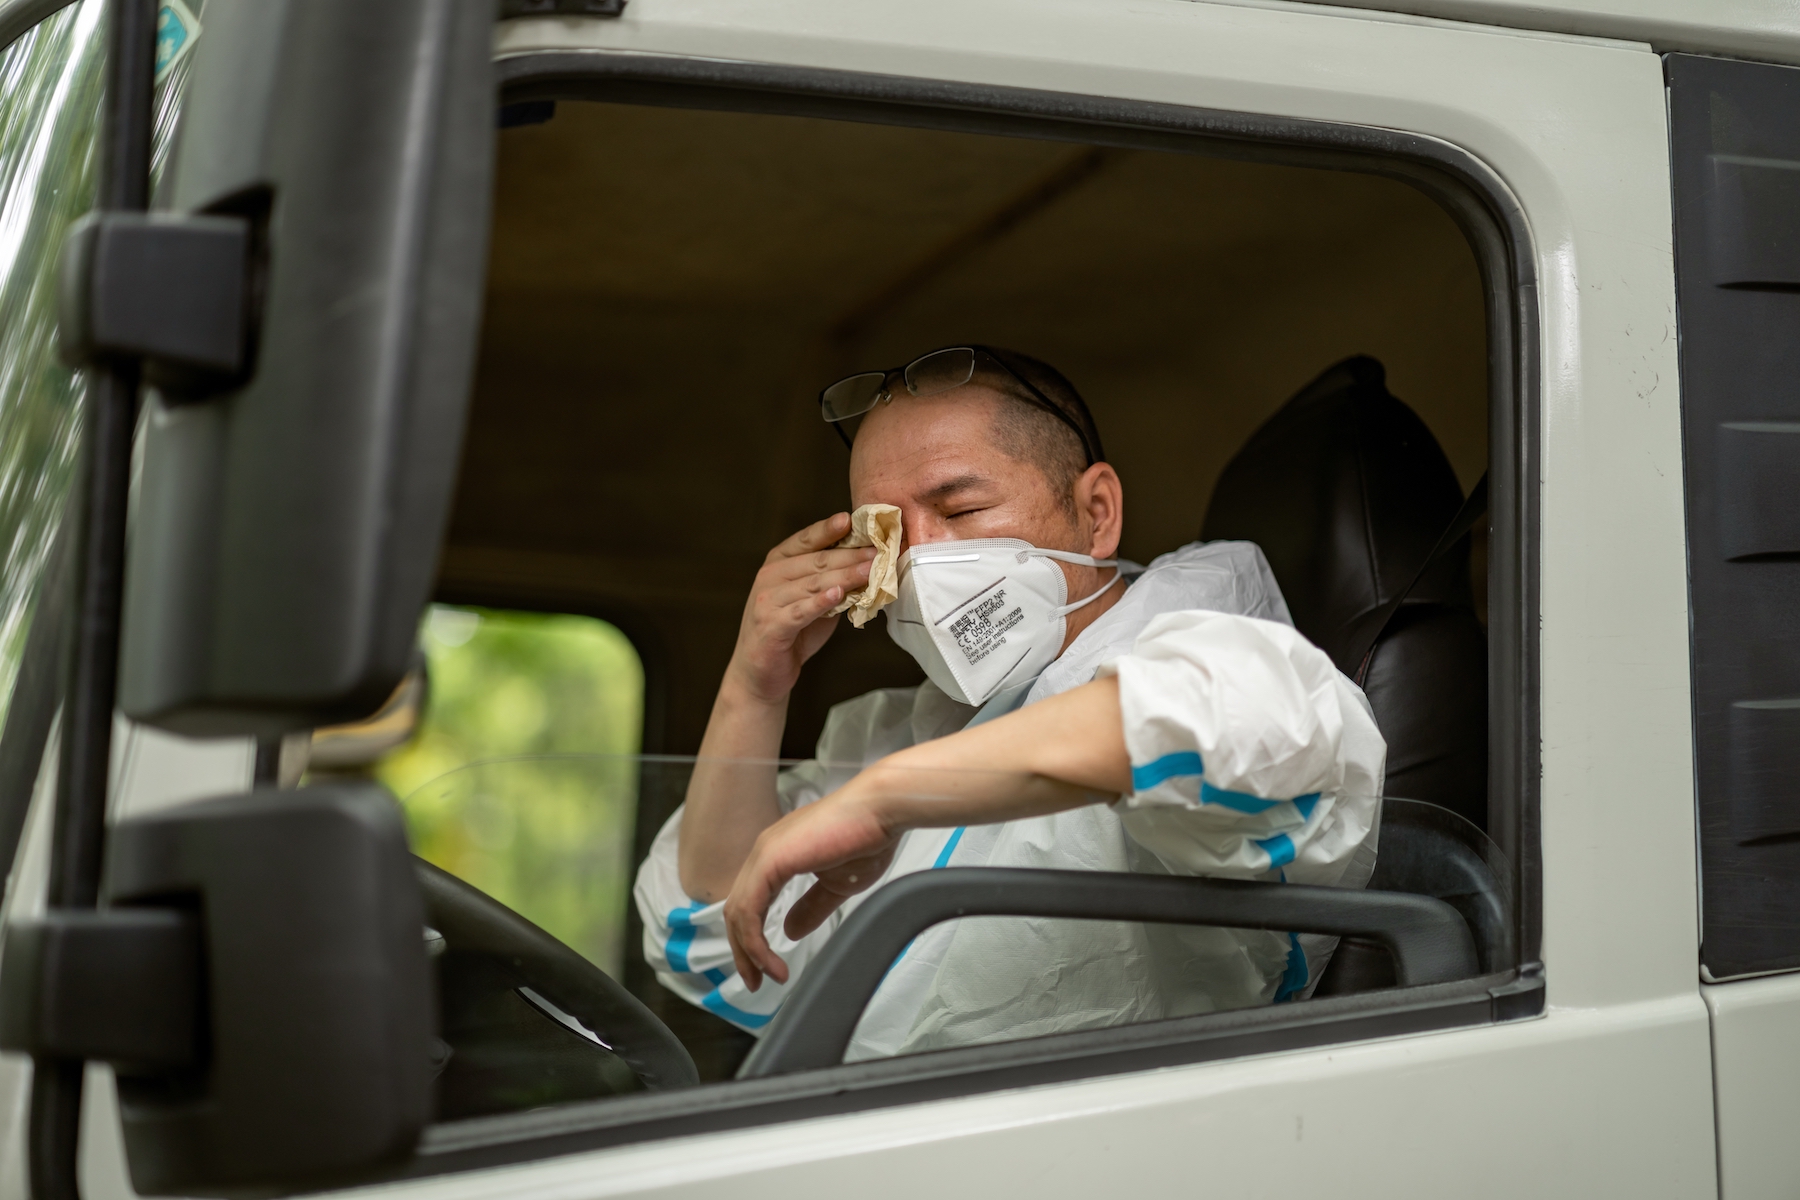 A truck driver wearing a face mask and in full PPE wipes his face while seated in the cab of a truck